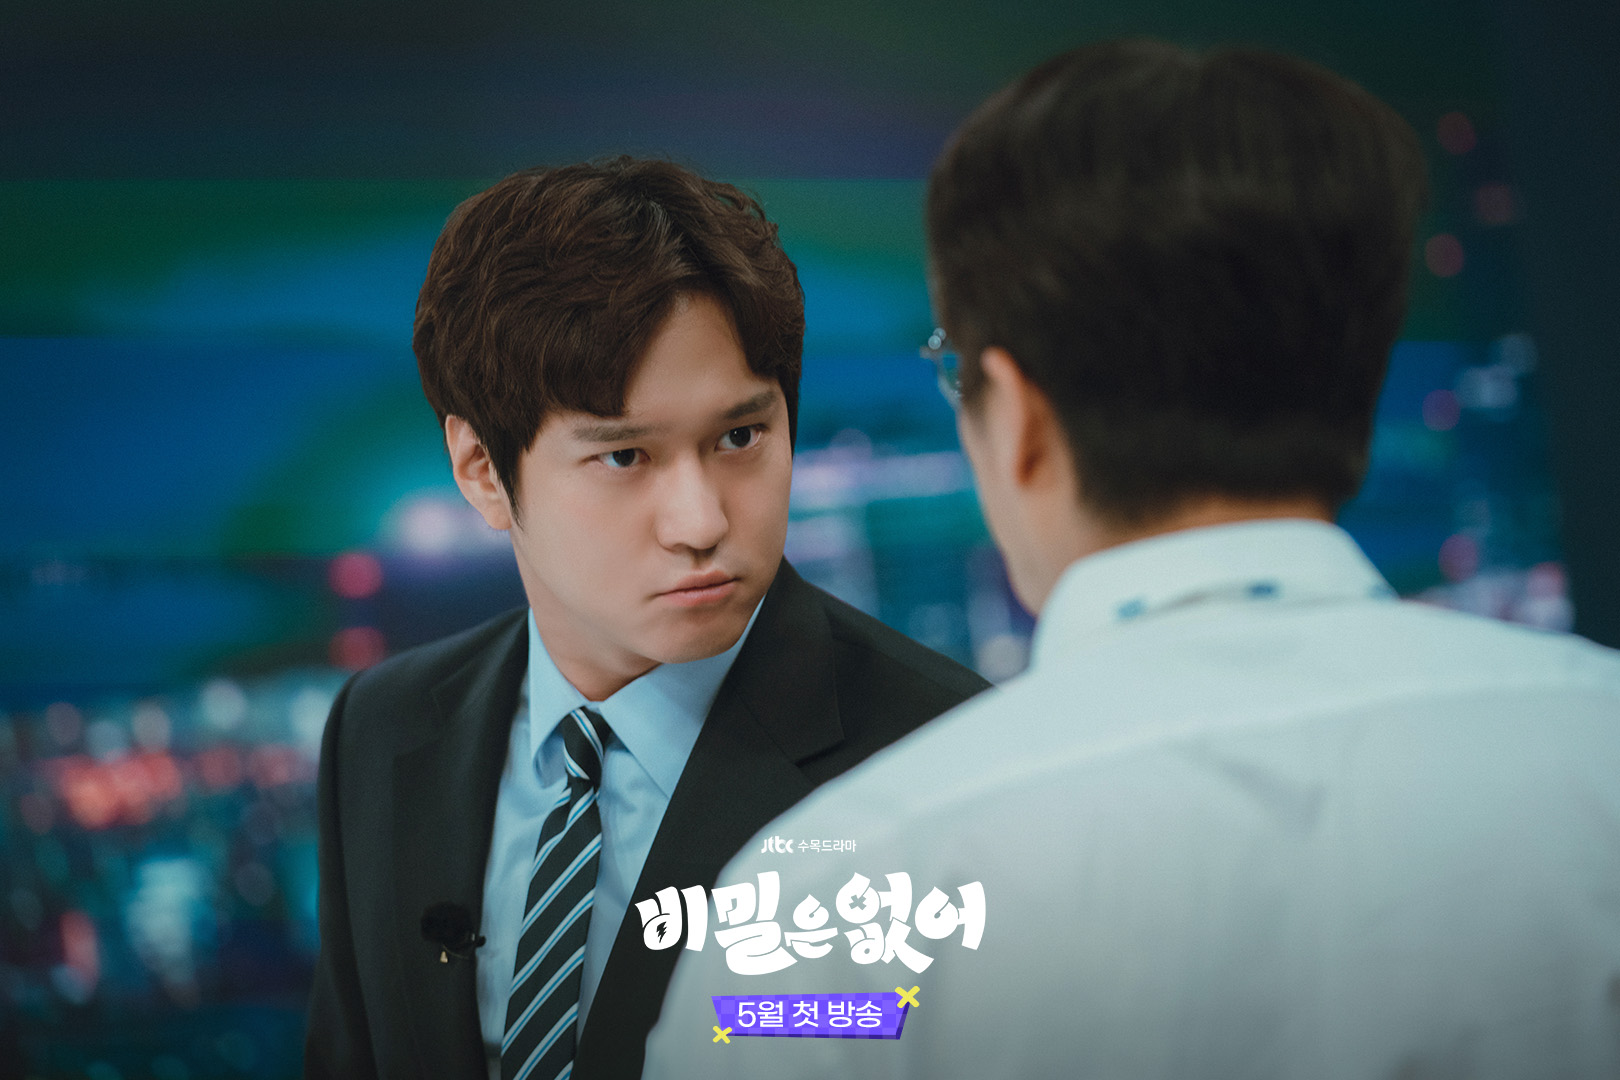 Go Kyung Pyo Becomes A Troublemaker News Anchor In New Rom-Com Drama